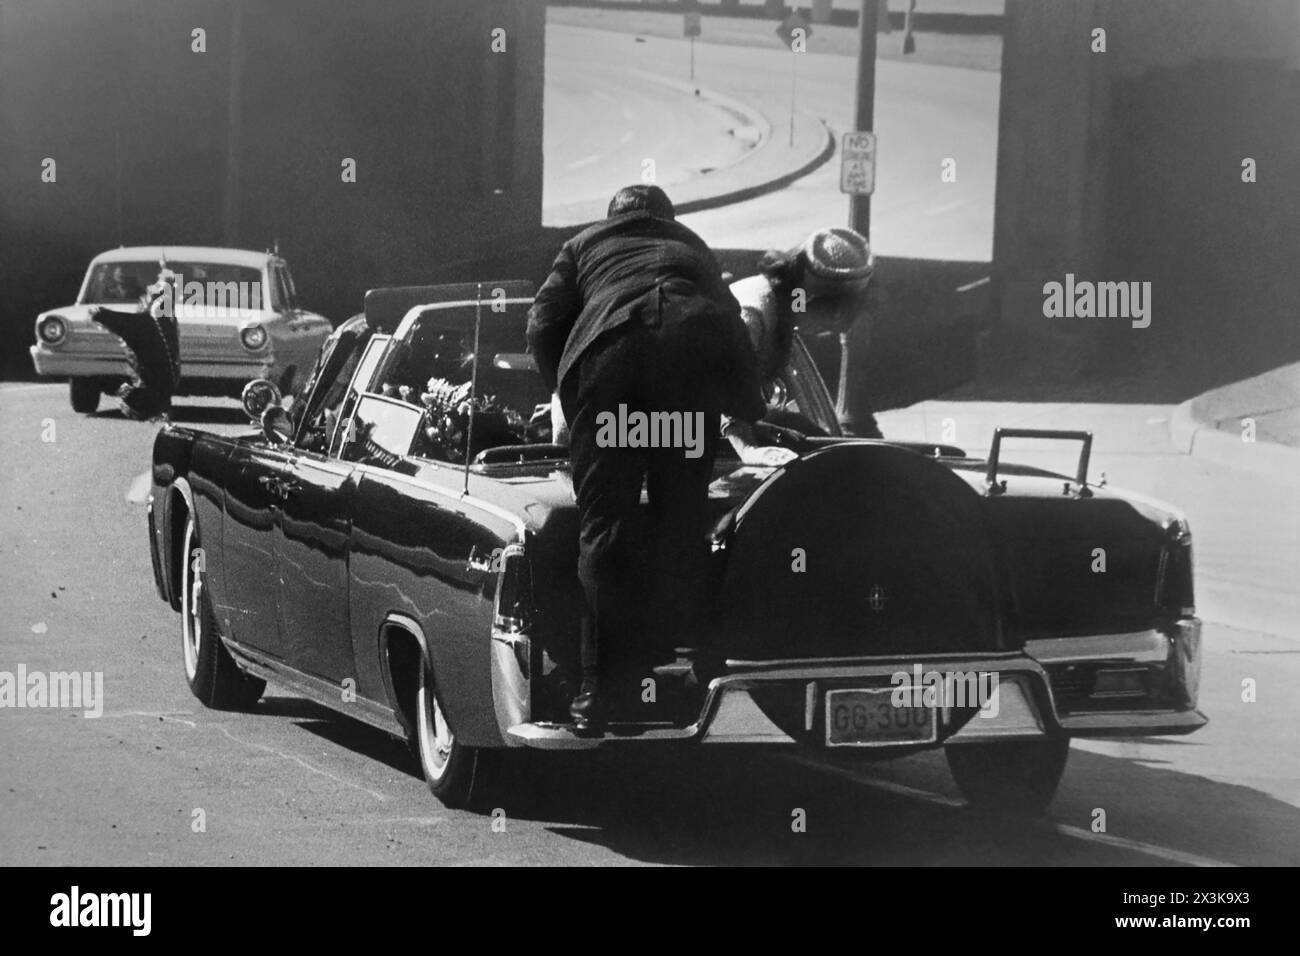 President John F. Kennedy slumped down in the back seat of his motorcade car after being shot in Dallas, Texas, on November 22, 1963. First Lady Jaqueline Kennedy leans over the President as a Secret Service man goes to her aid. (USA) Stock Photo